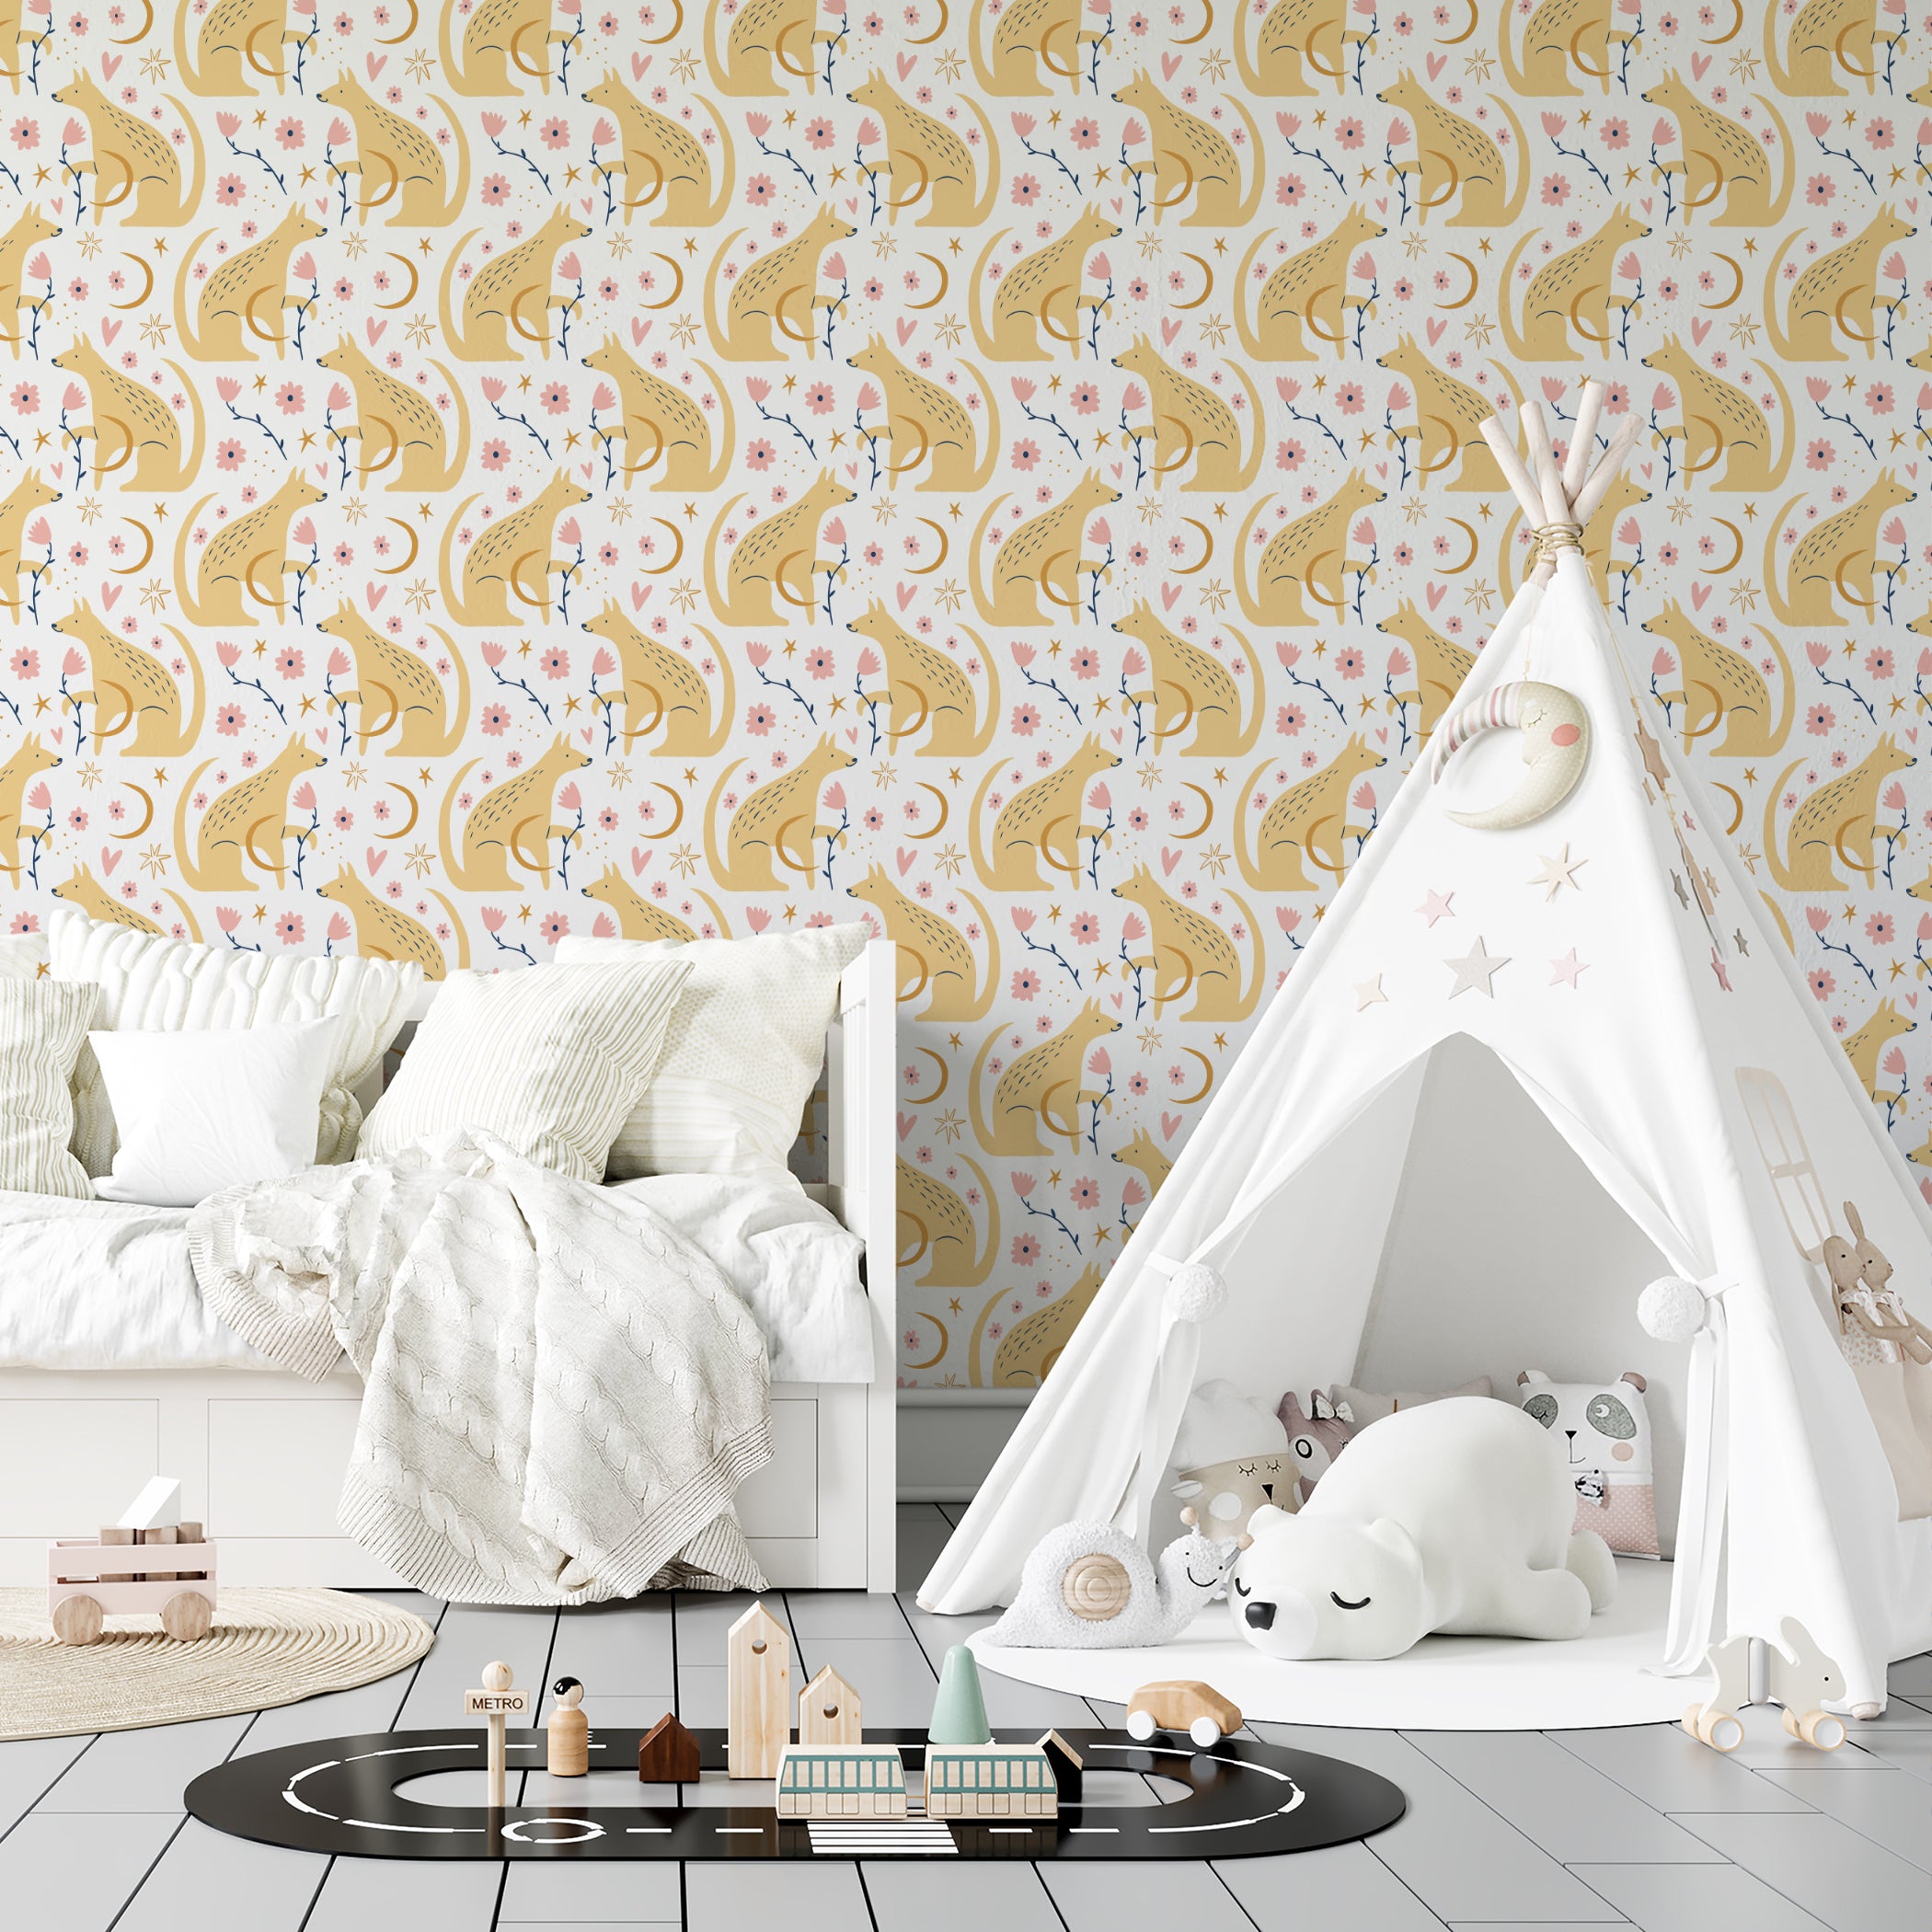 A charming children's room decorated with 'Dog Wallpaper 41,' displaying golden dogs, celestial motifs, and floral elements. The space is complemented by a white teepee, soft bedding, and playful toys, creating a dreamy and inviting atmosphere.